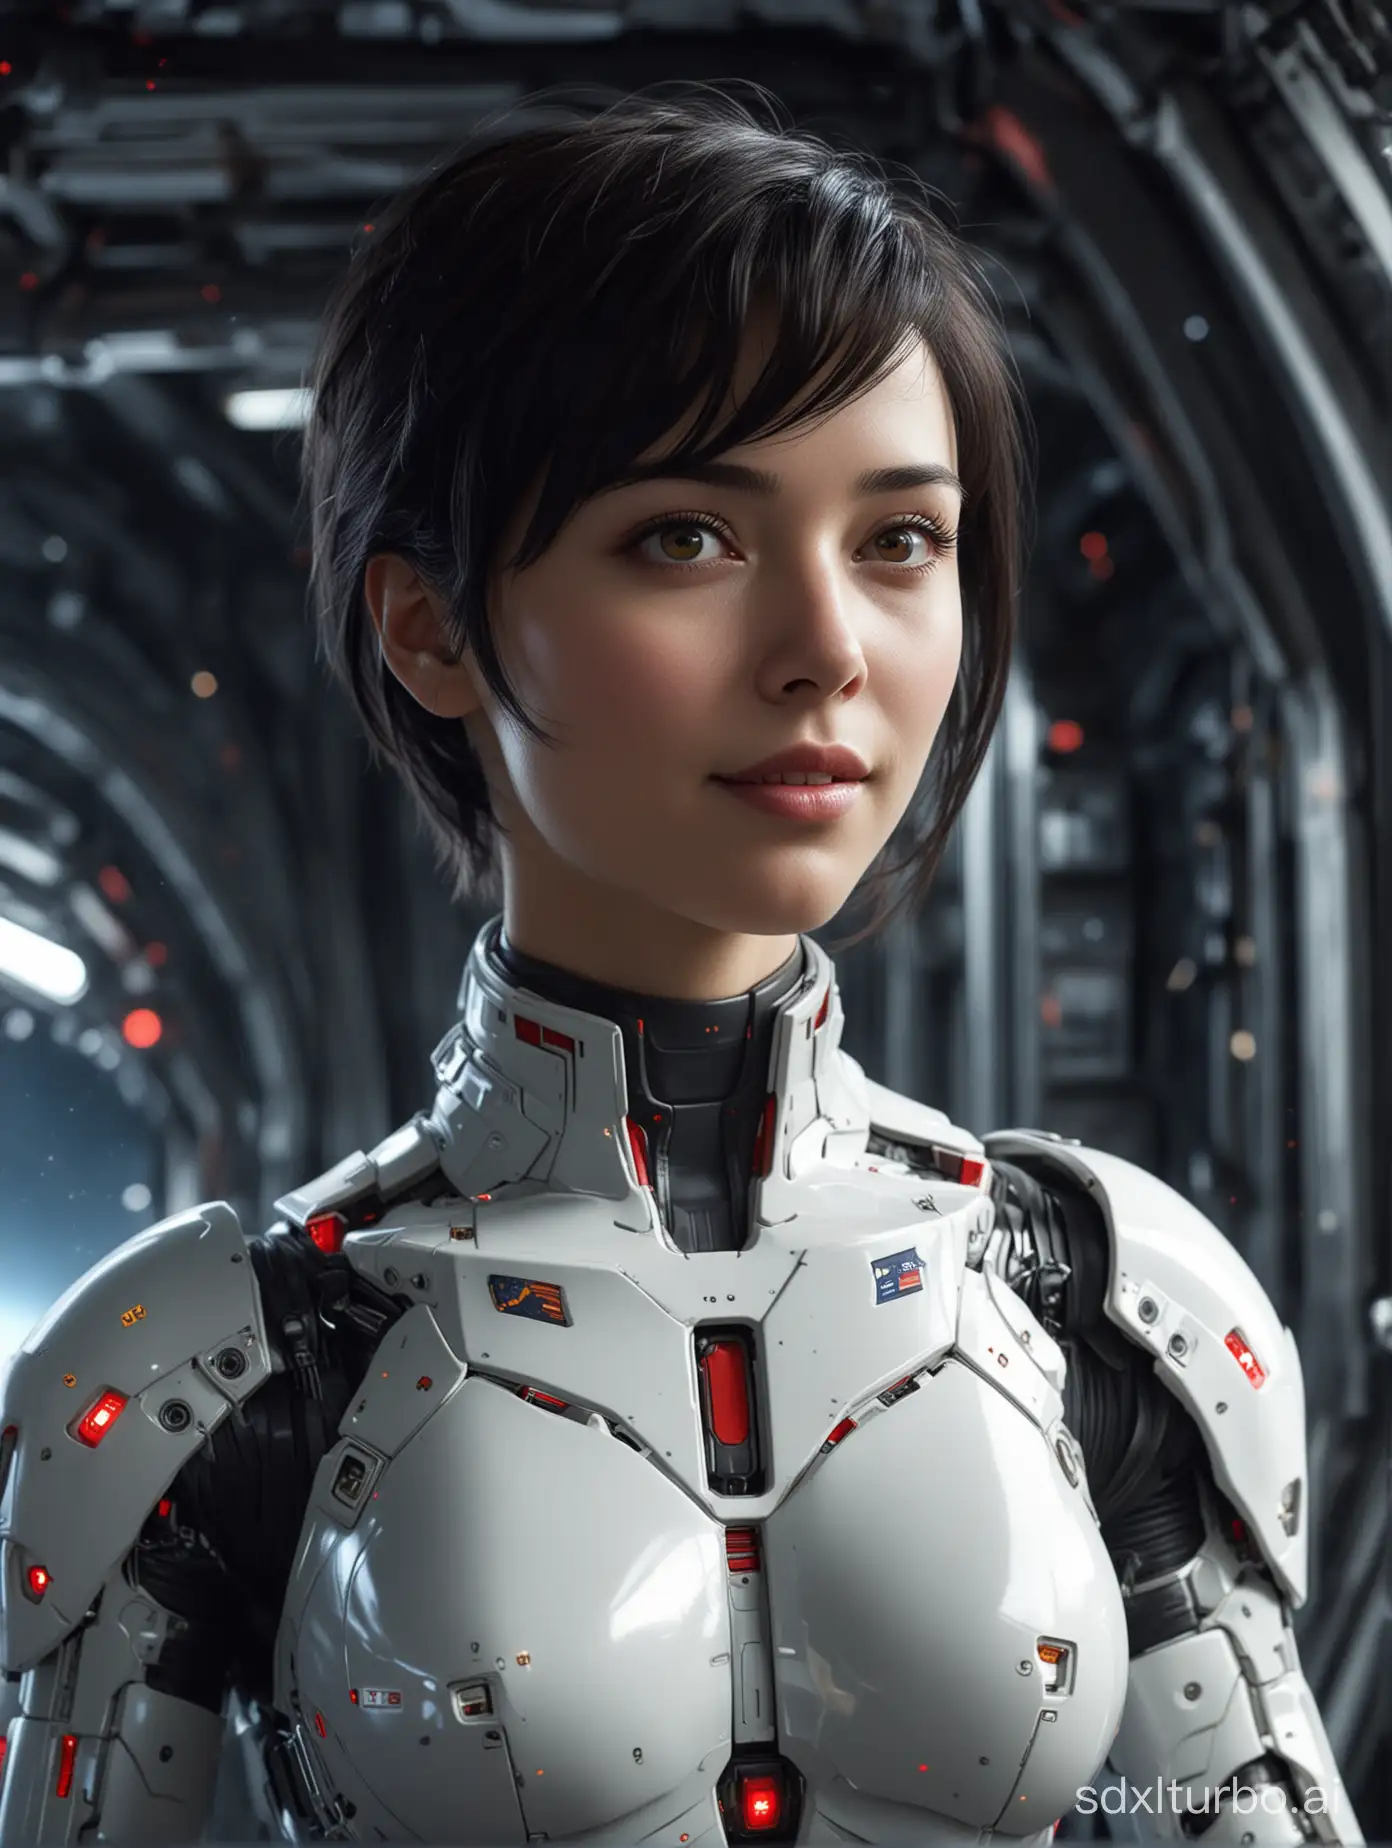  In the vast expanse of deep space, aboard a formidable warship, a petite android stands upon the deck, her figure a mesmerizing blend of sleek machinery and graceful masculinity. From the neck down, she is predominantly mechanical, her form encased in white plasteel armor with striking red accents emitting a subtle glow, seamlessly integrating with her human-like features.

Short silky black hair, yet remarkably detailed, android face. With delicate sensors mimicking human expressions, she wears a wide grin as she gazes out into the infinite abyss beyond the viewport.

Her eyes, a captivating shade of brown, gleam with a hint of artificial luminescence, reflecting the distant stars that dot the cosmos. In this moment, she is the embodiment of freedom, a testament to the boundless possibilities that await those who dare to explore the depths of space and the uncharted territories that lie beyond.